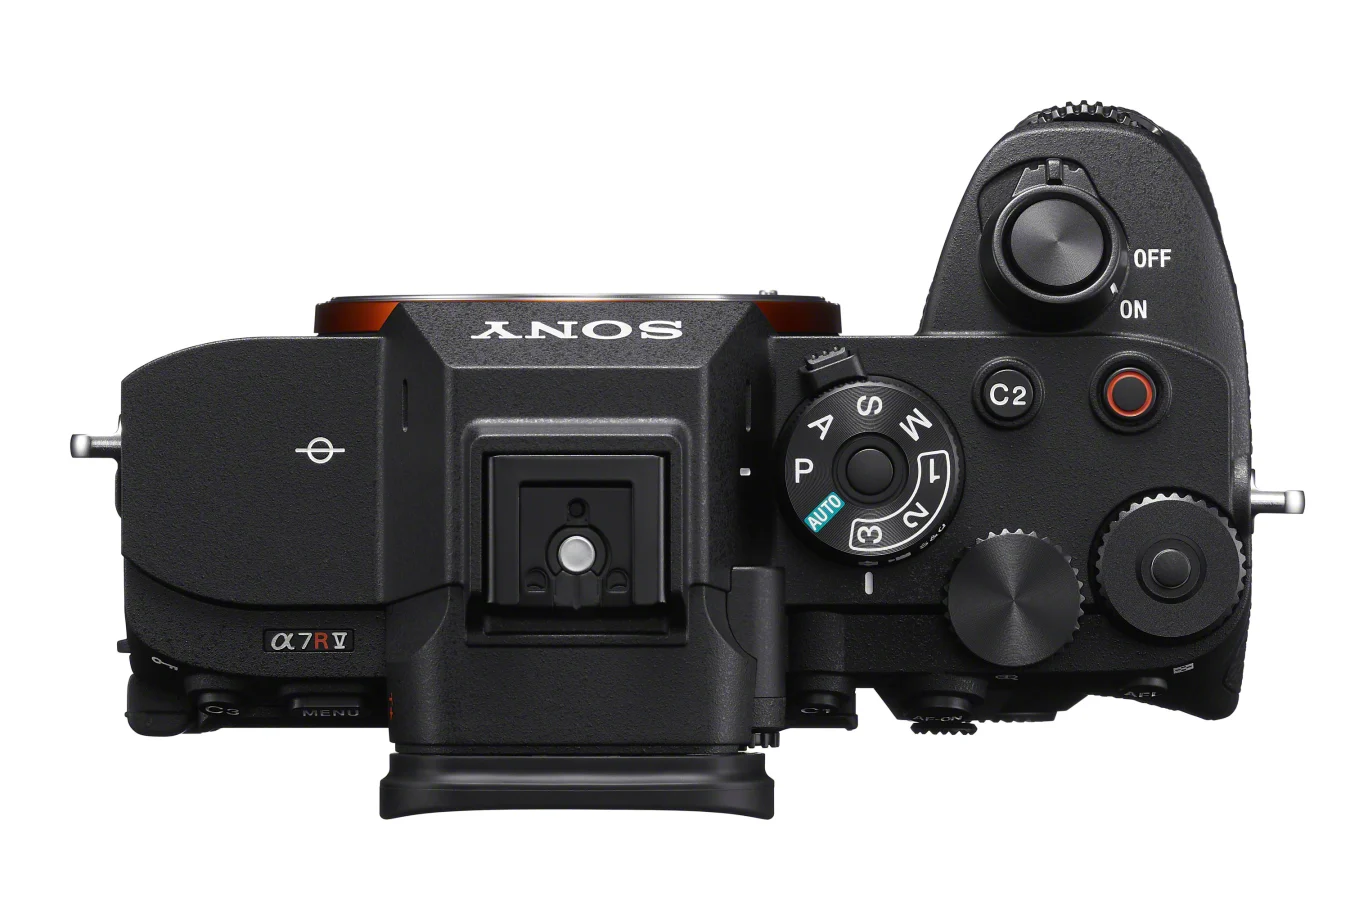 Sony's A7R V high-resolution mirrorless camera now shoots 8K video